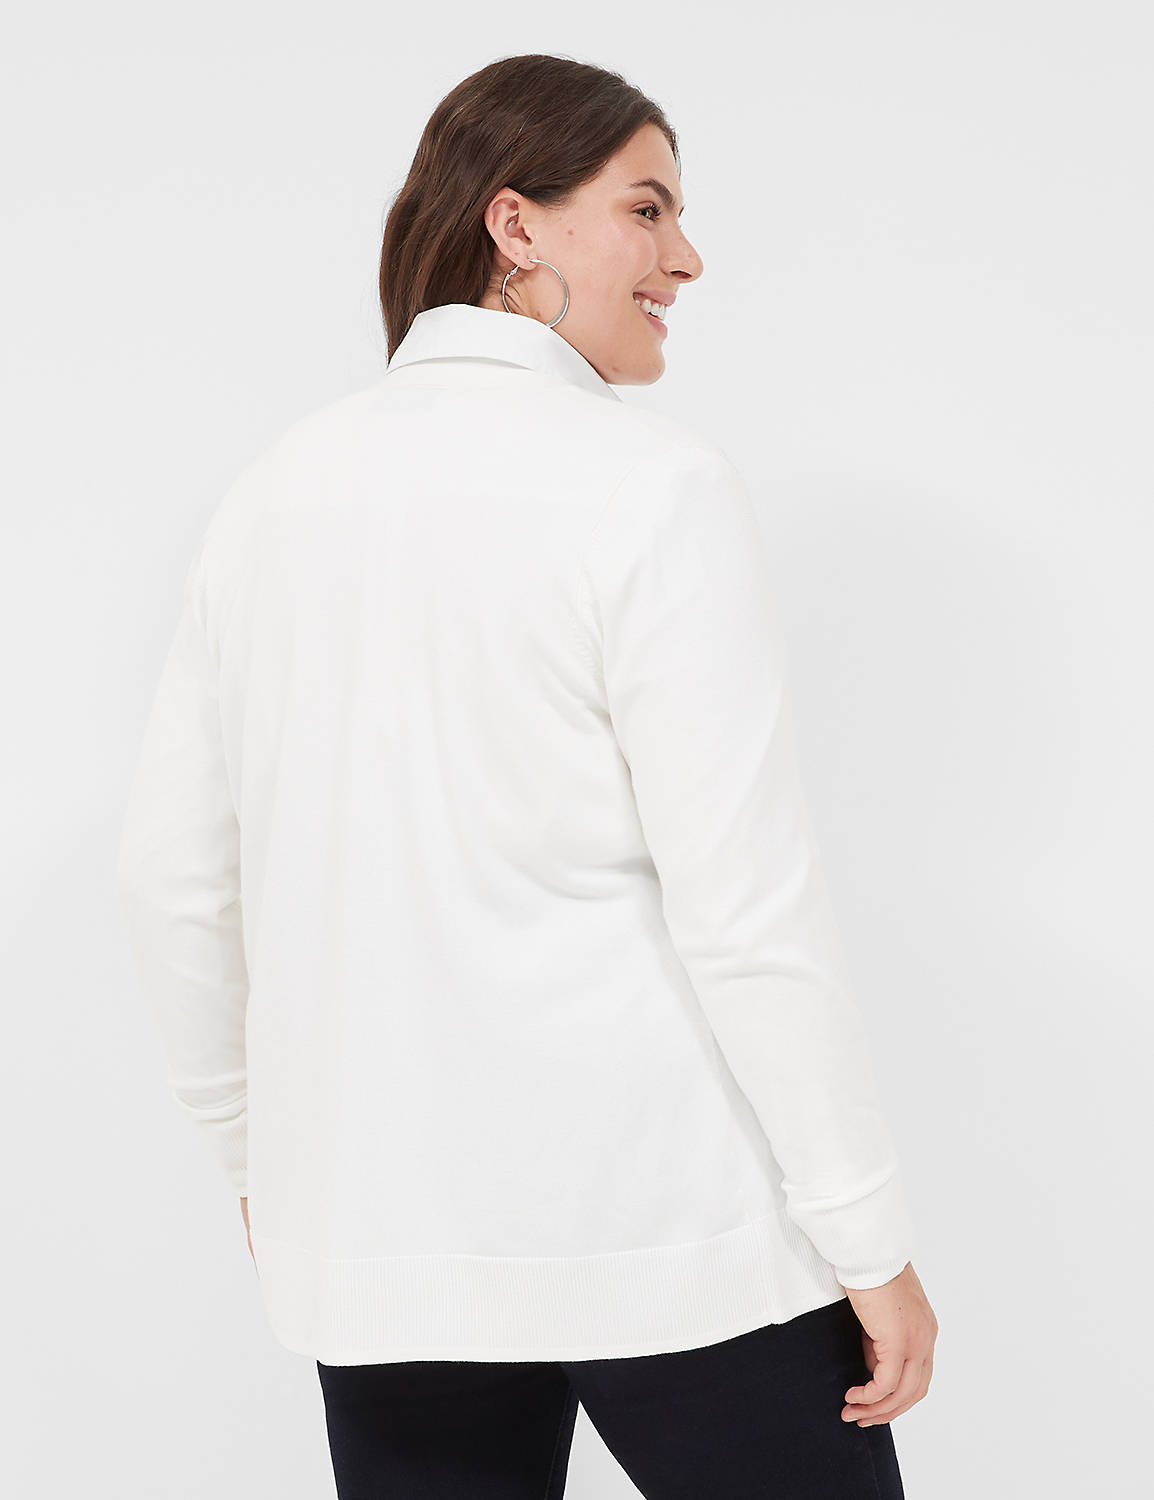 Classic Long Sleeve Open Front Mode Product Image 2